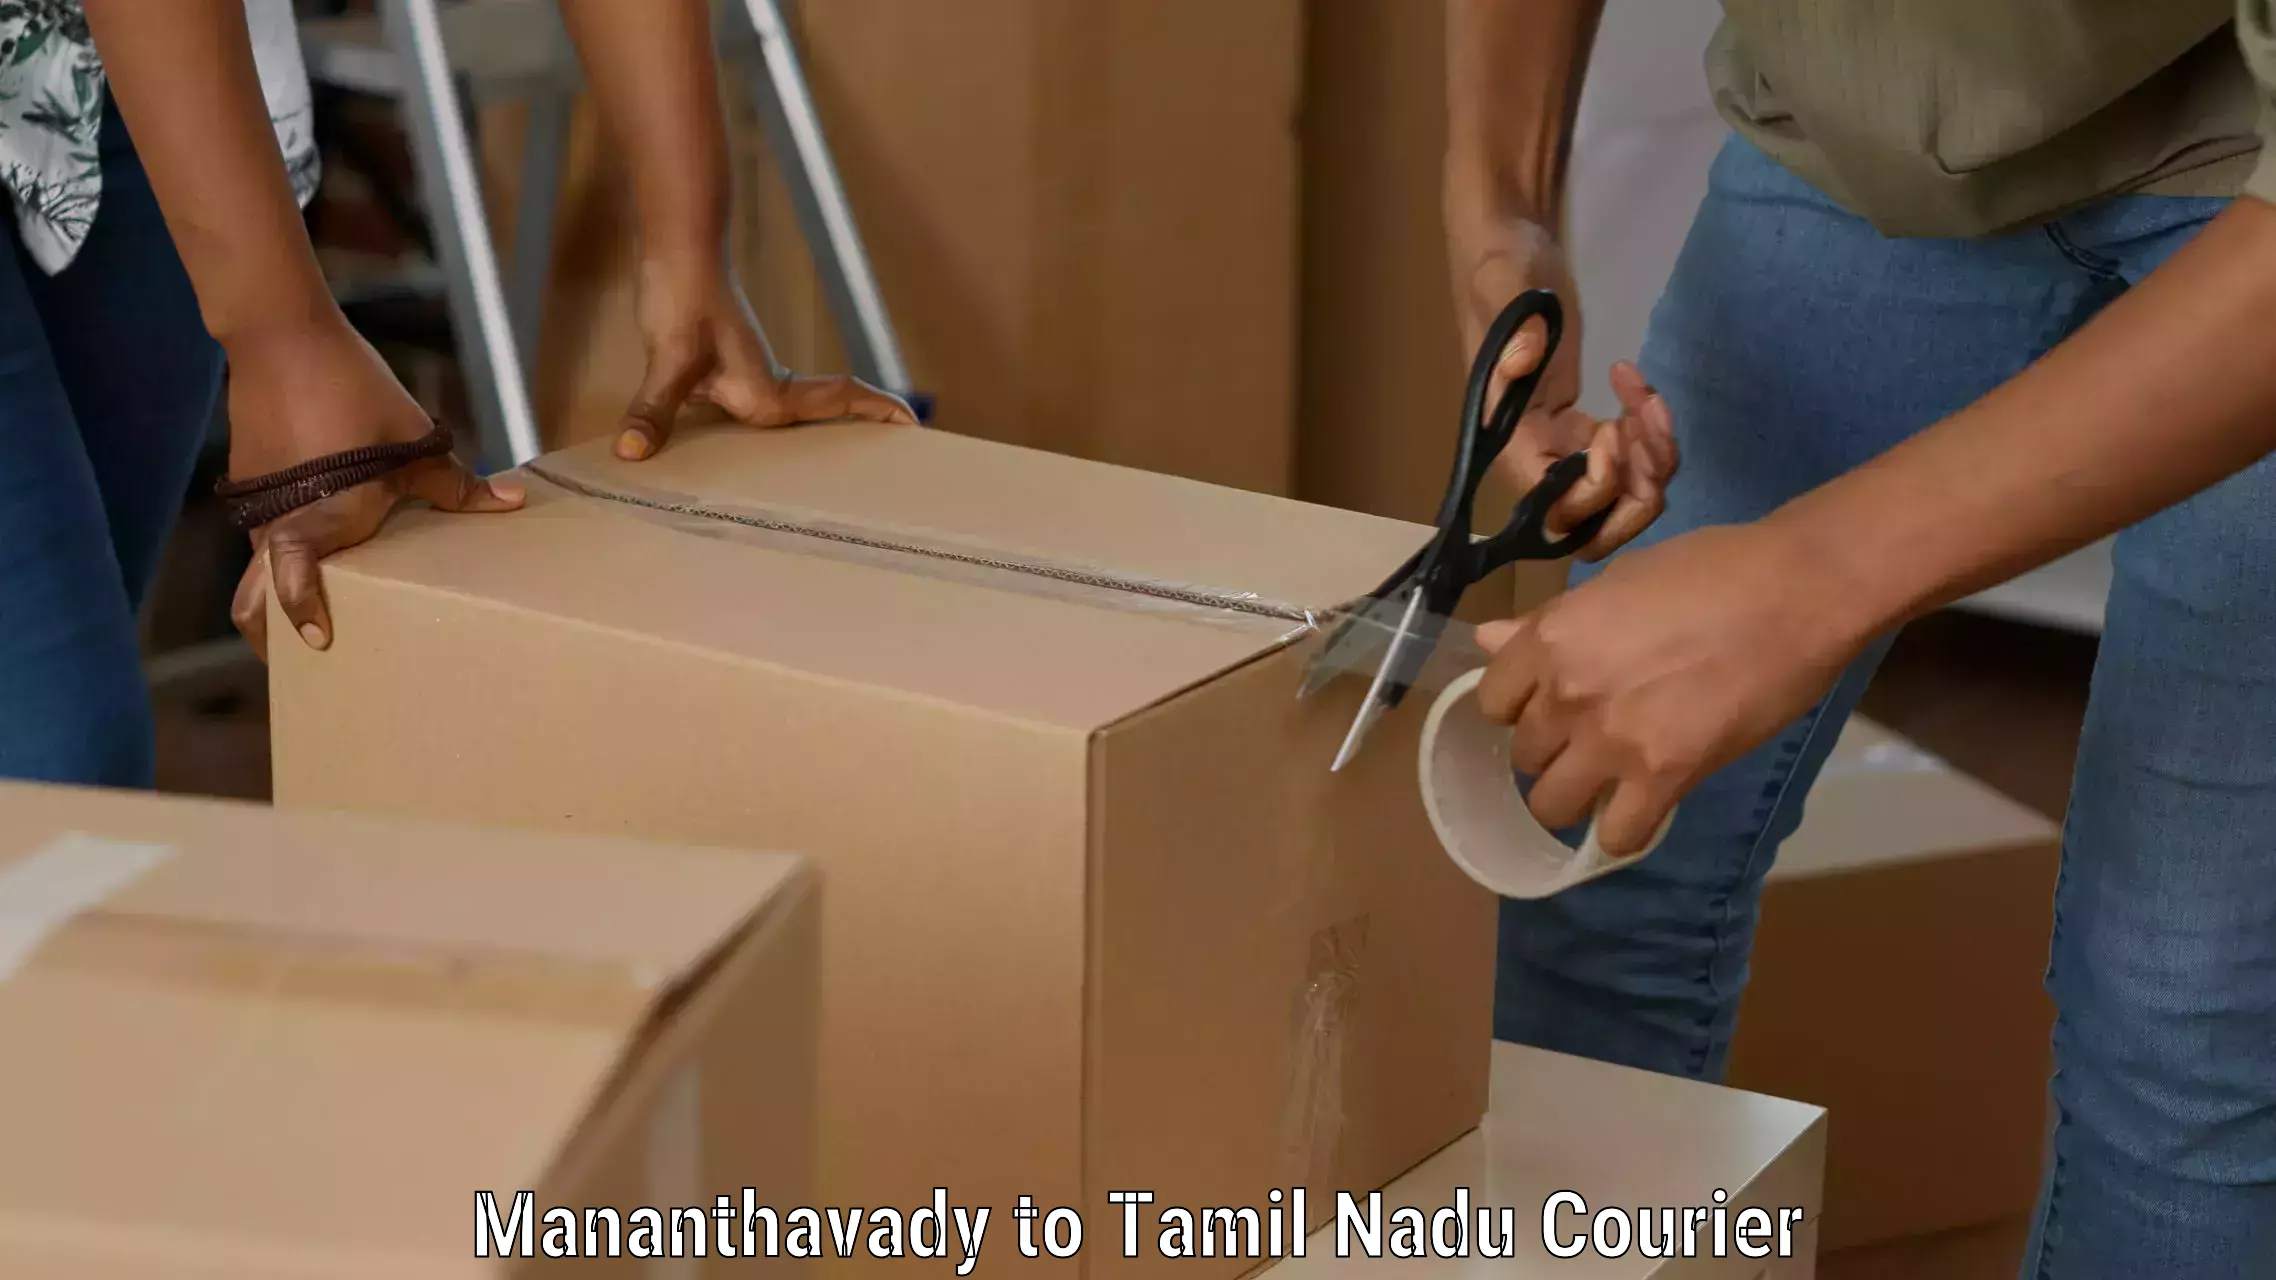 Professional courier handling Mananthavady to Virudhachalam